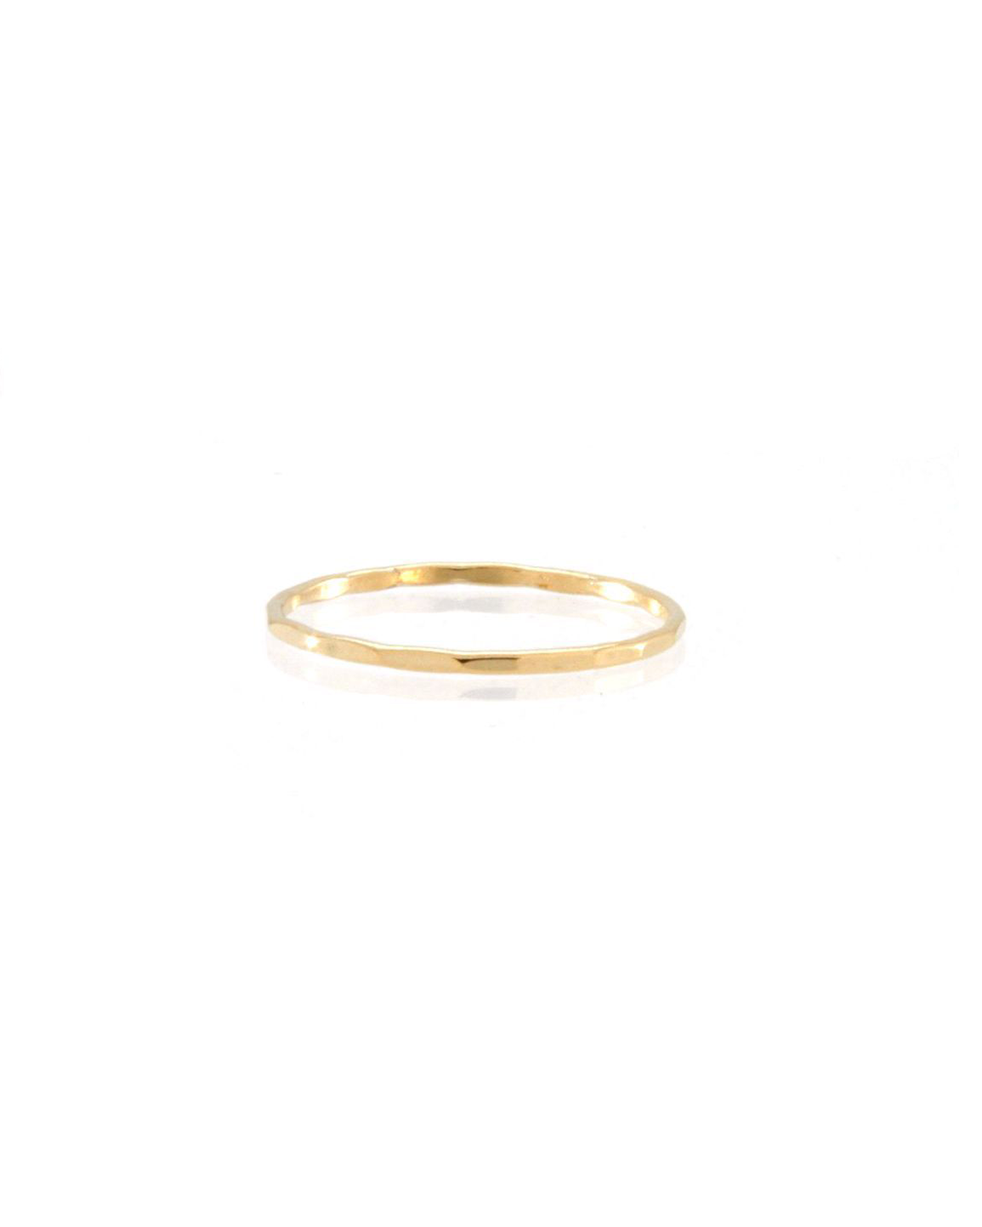 14k gold filled hammer textured thin ring